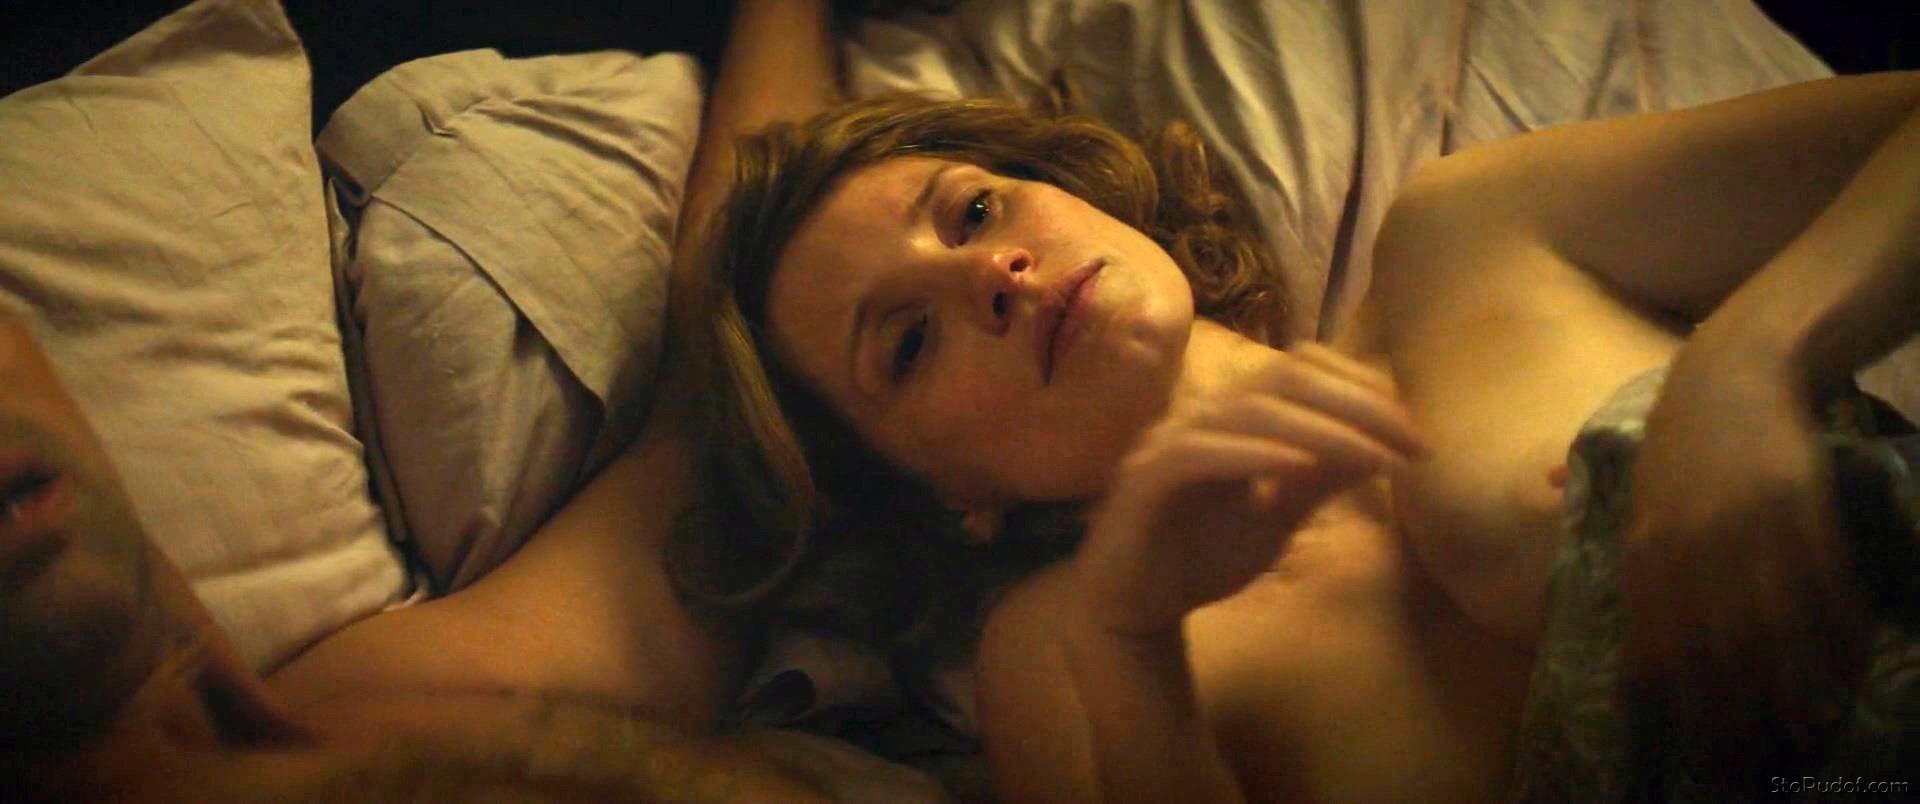 Jessica Chastain Free Nude Video.